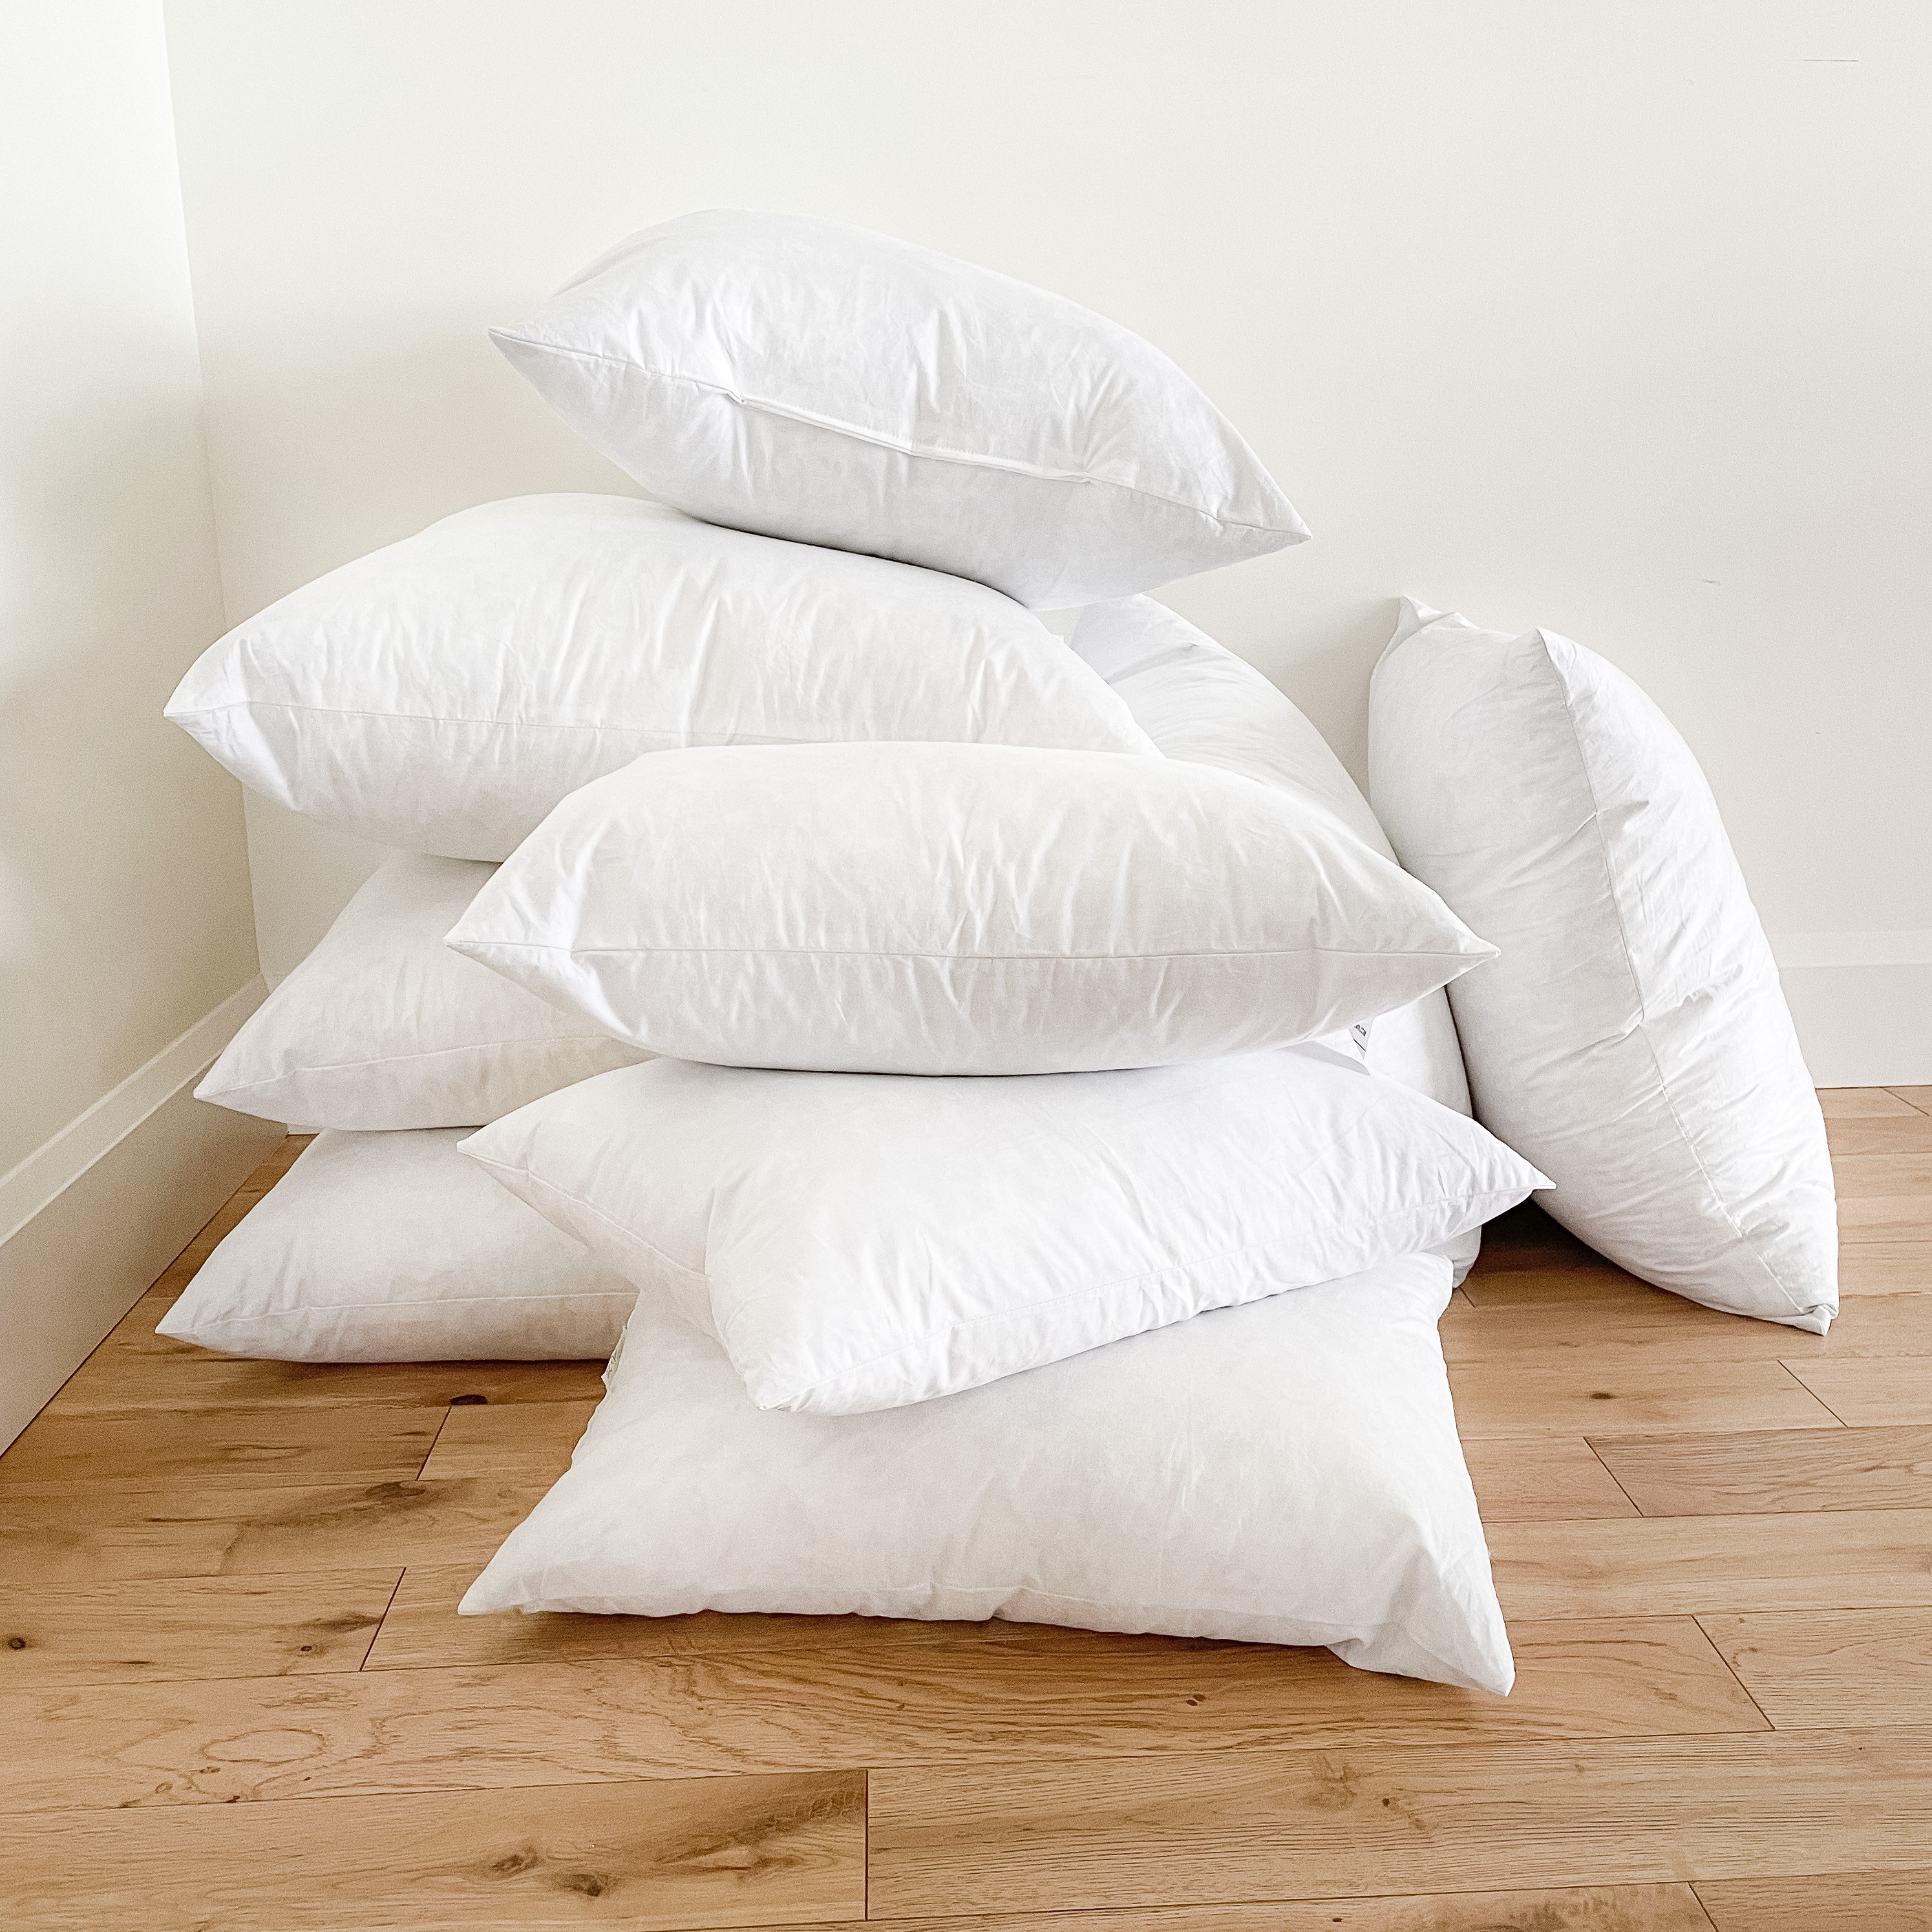 Goose Down & Feather Throw Pillow Inserts – From Hungary – Hamvay-Láng